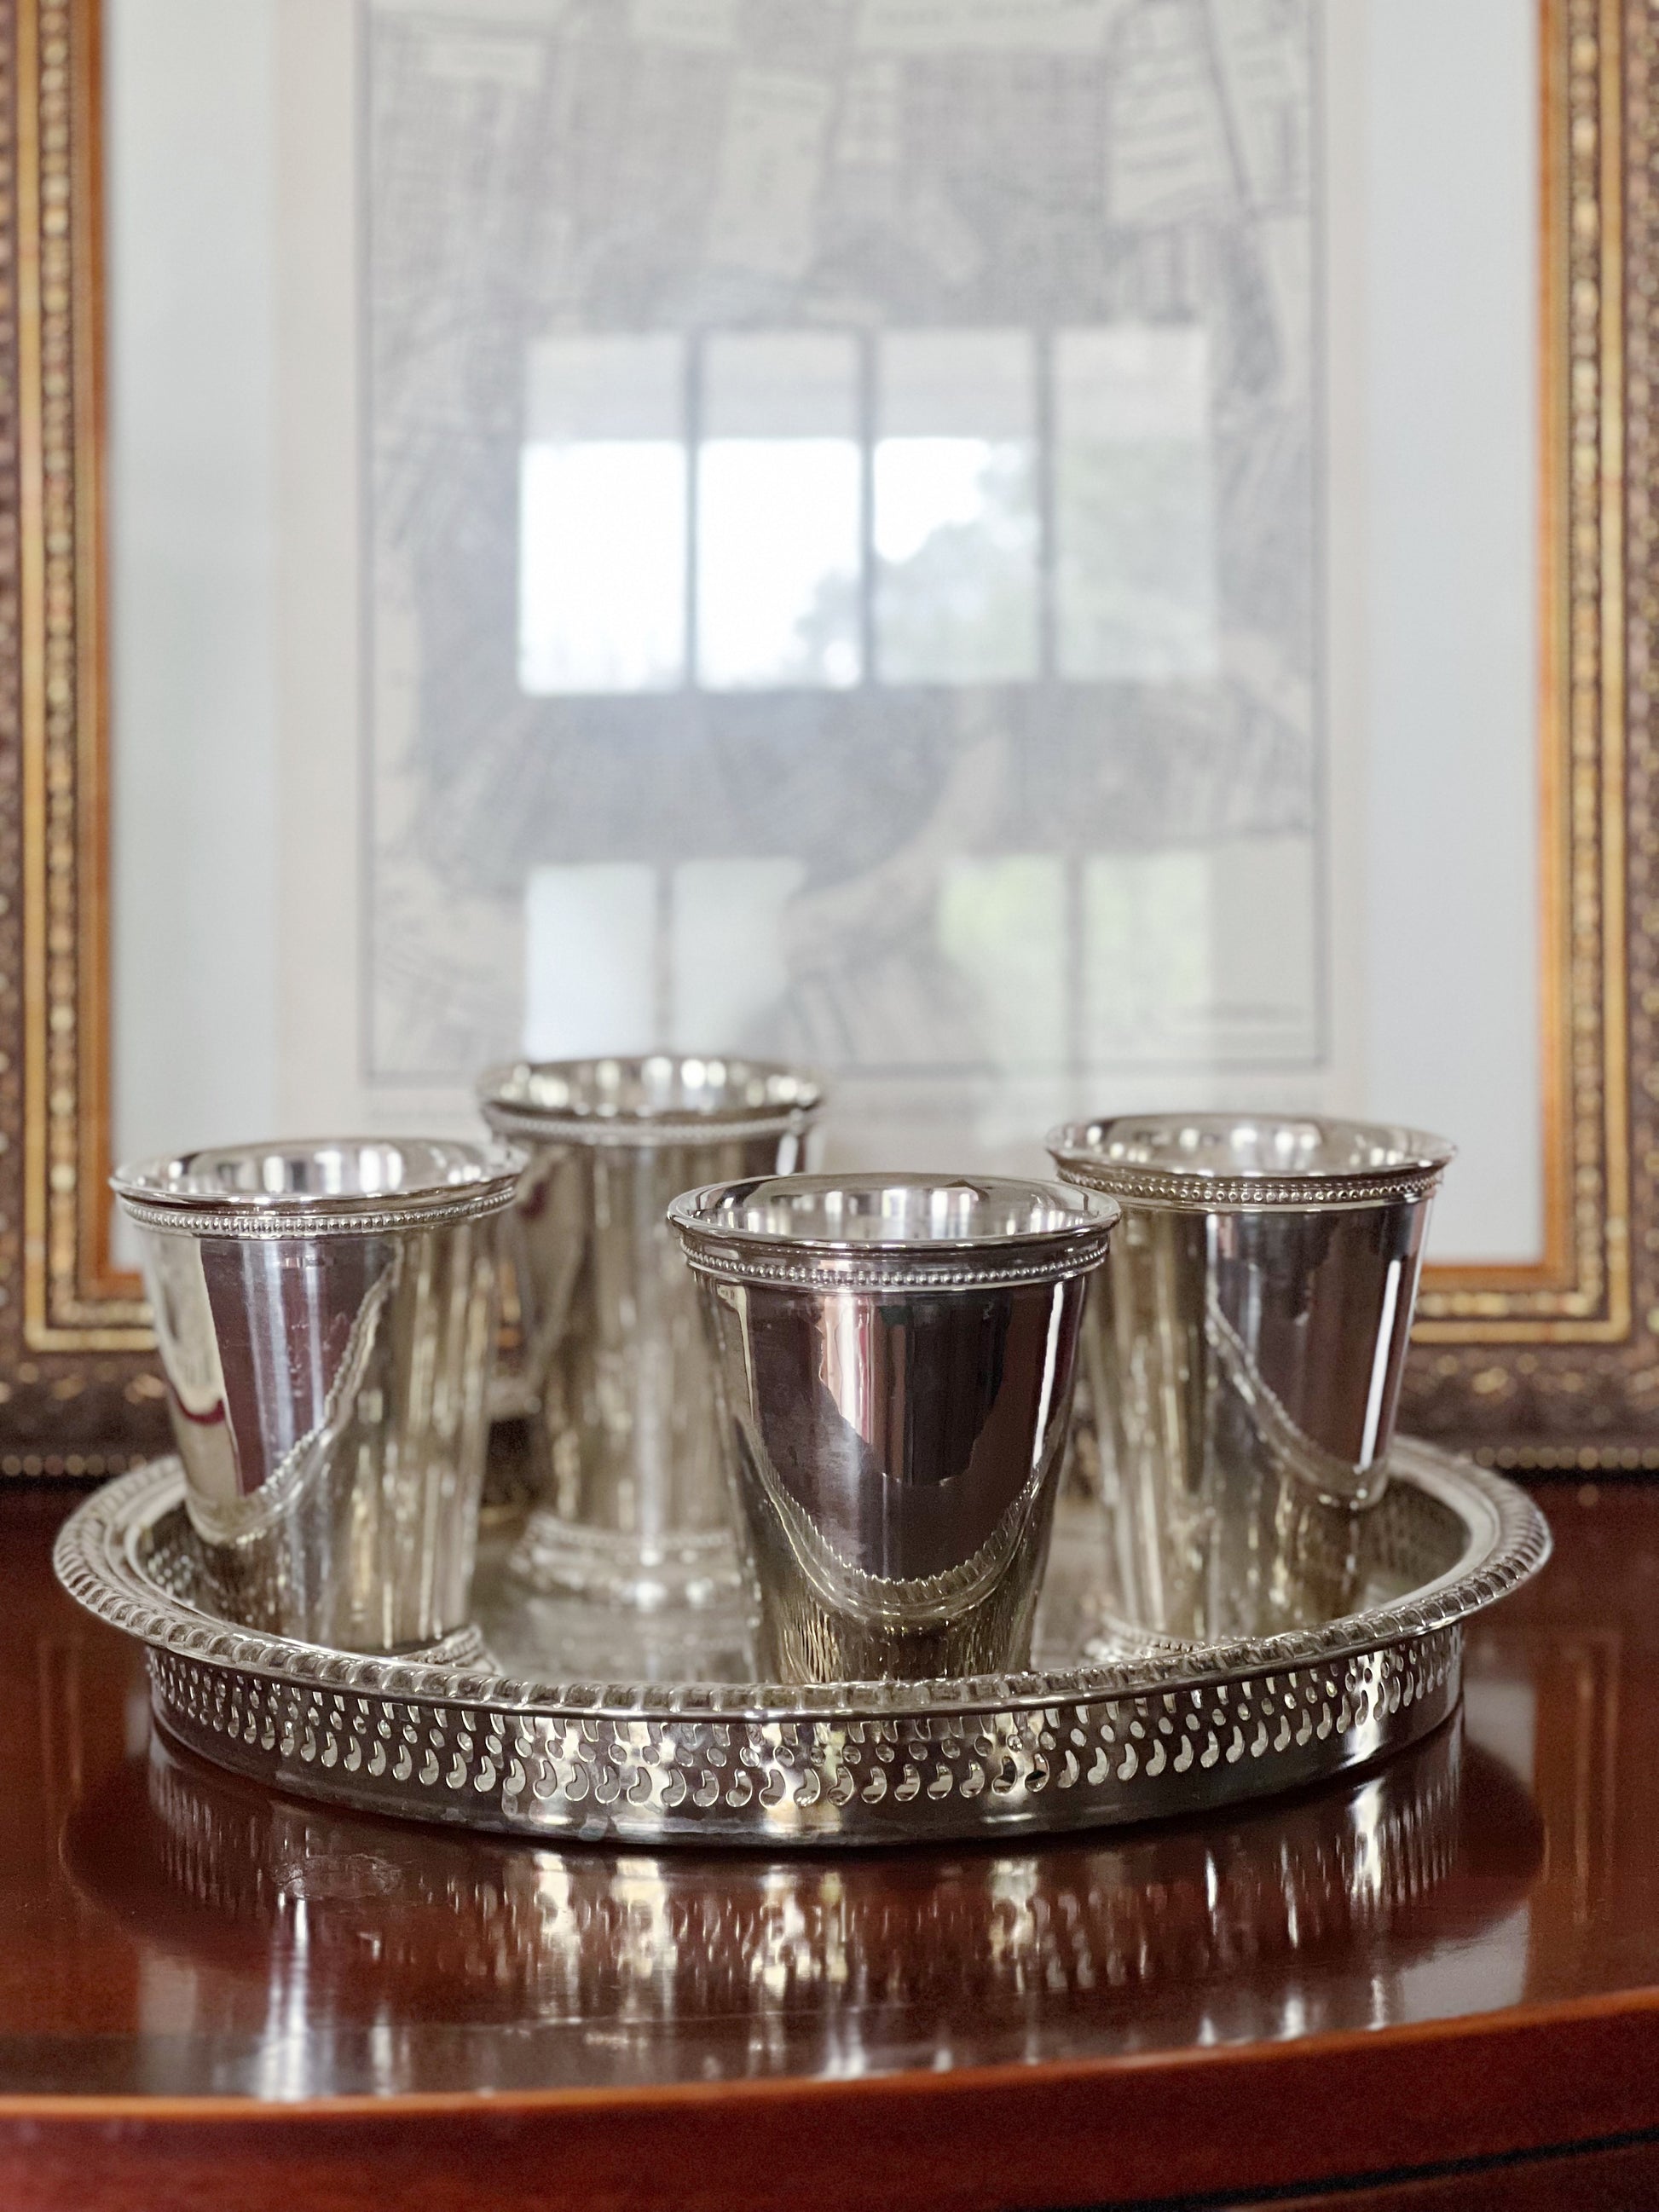 Vintage silver mint juleps cups in a vintage serving tray